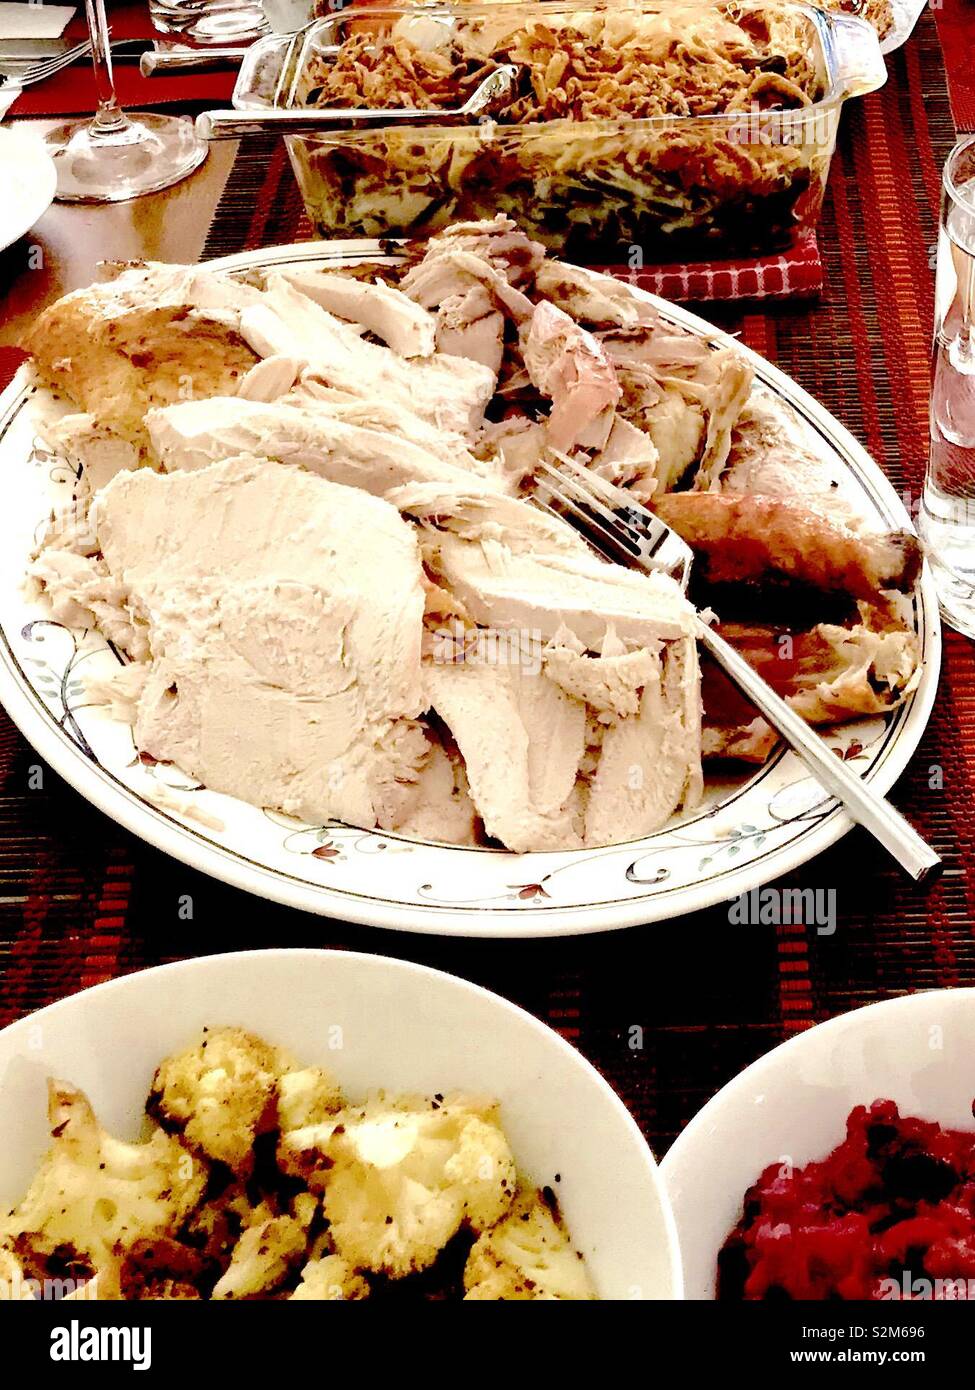 Sliced turkey dinner with all the trimmings Stock Photo